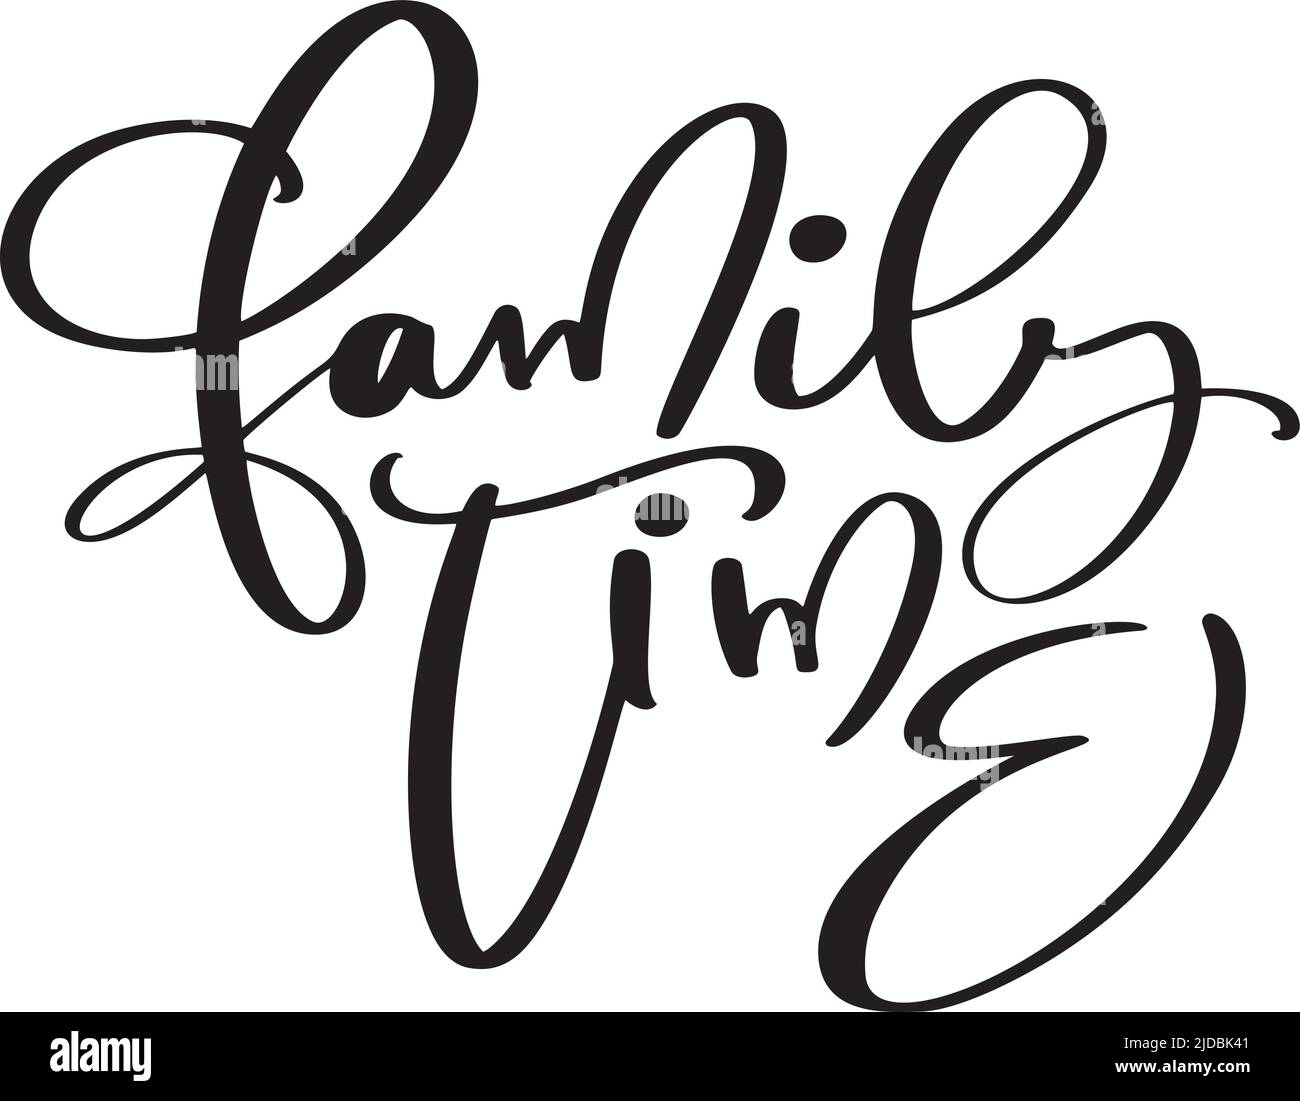 Vector calligraphy vintage text Family time with heart. Inscription with smooth lines. Minimalistic hand lettering illustration Stock Vector